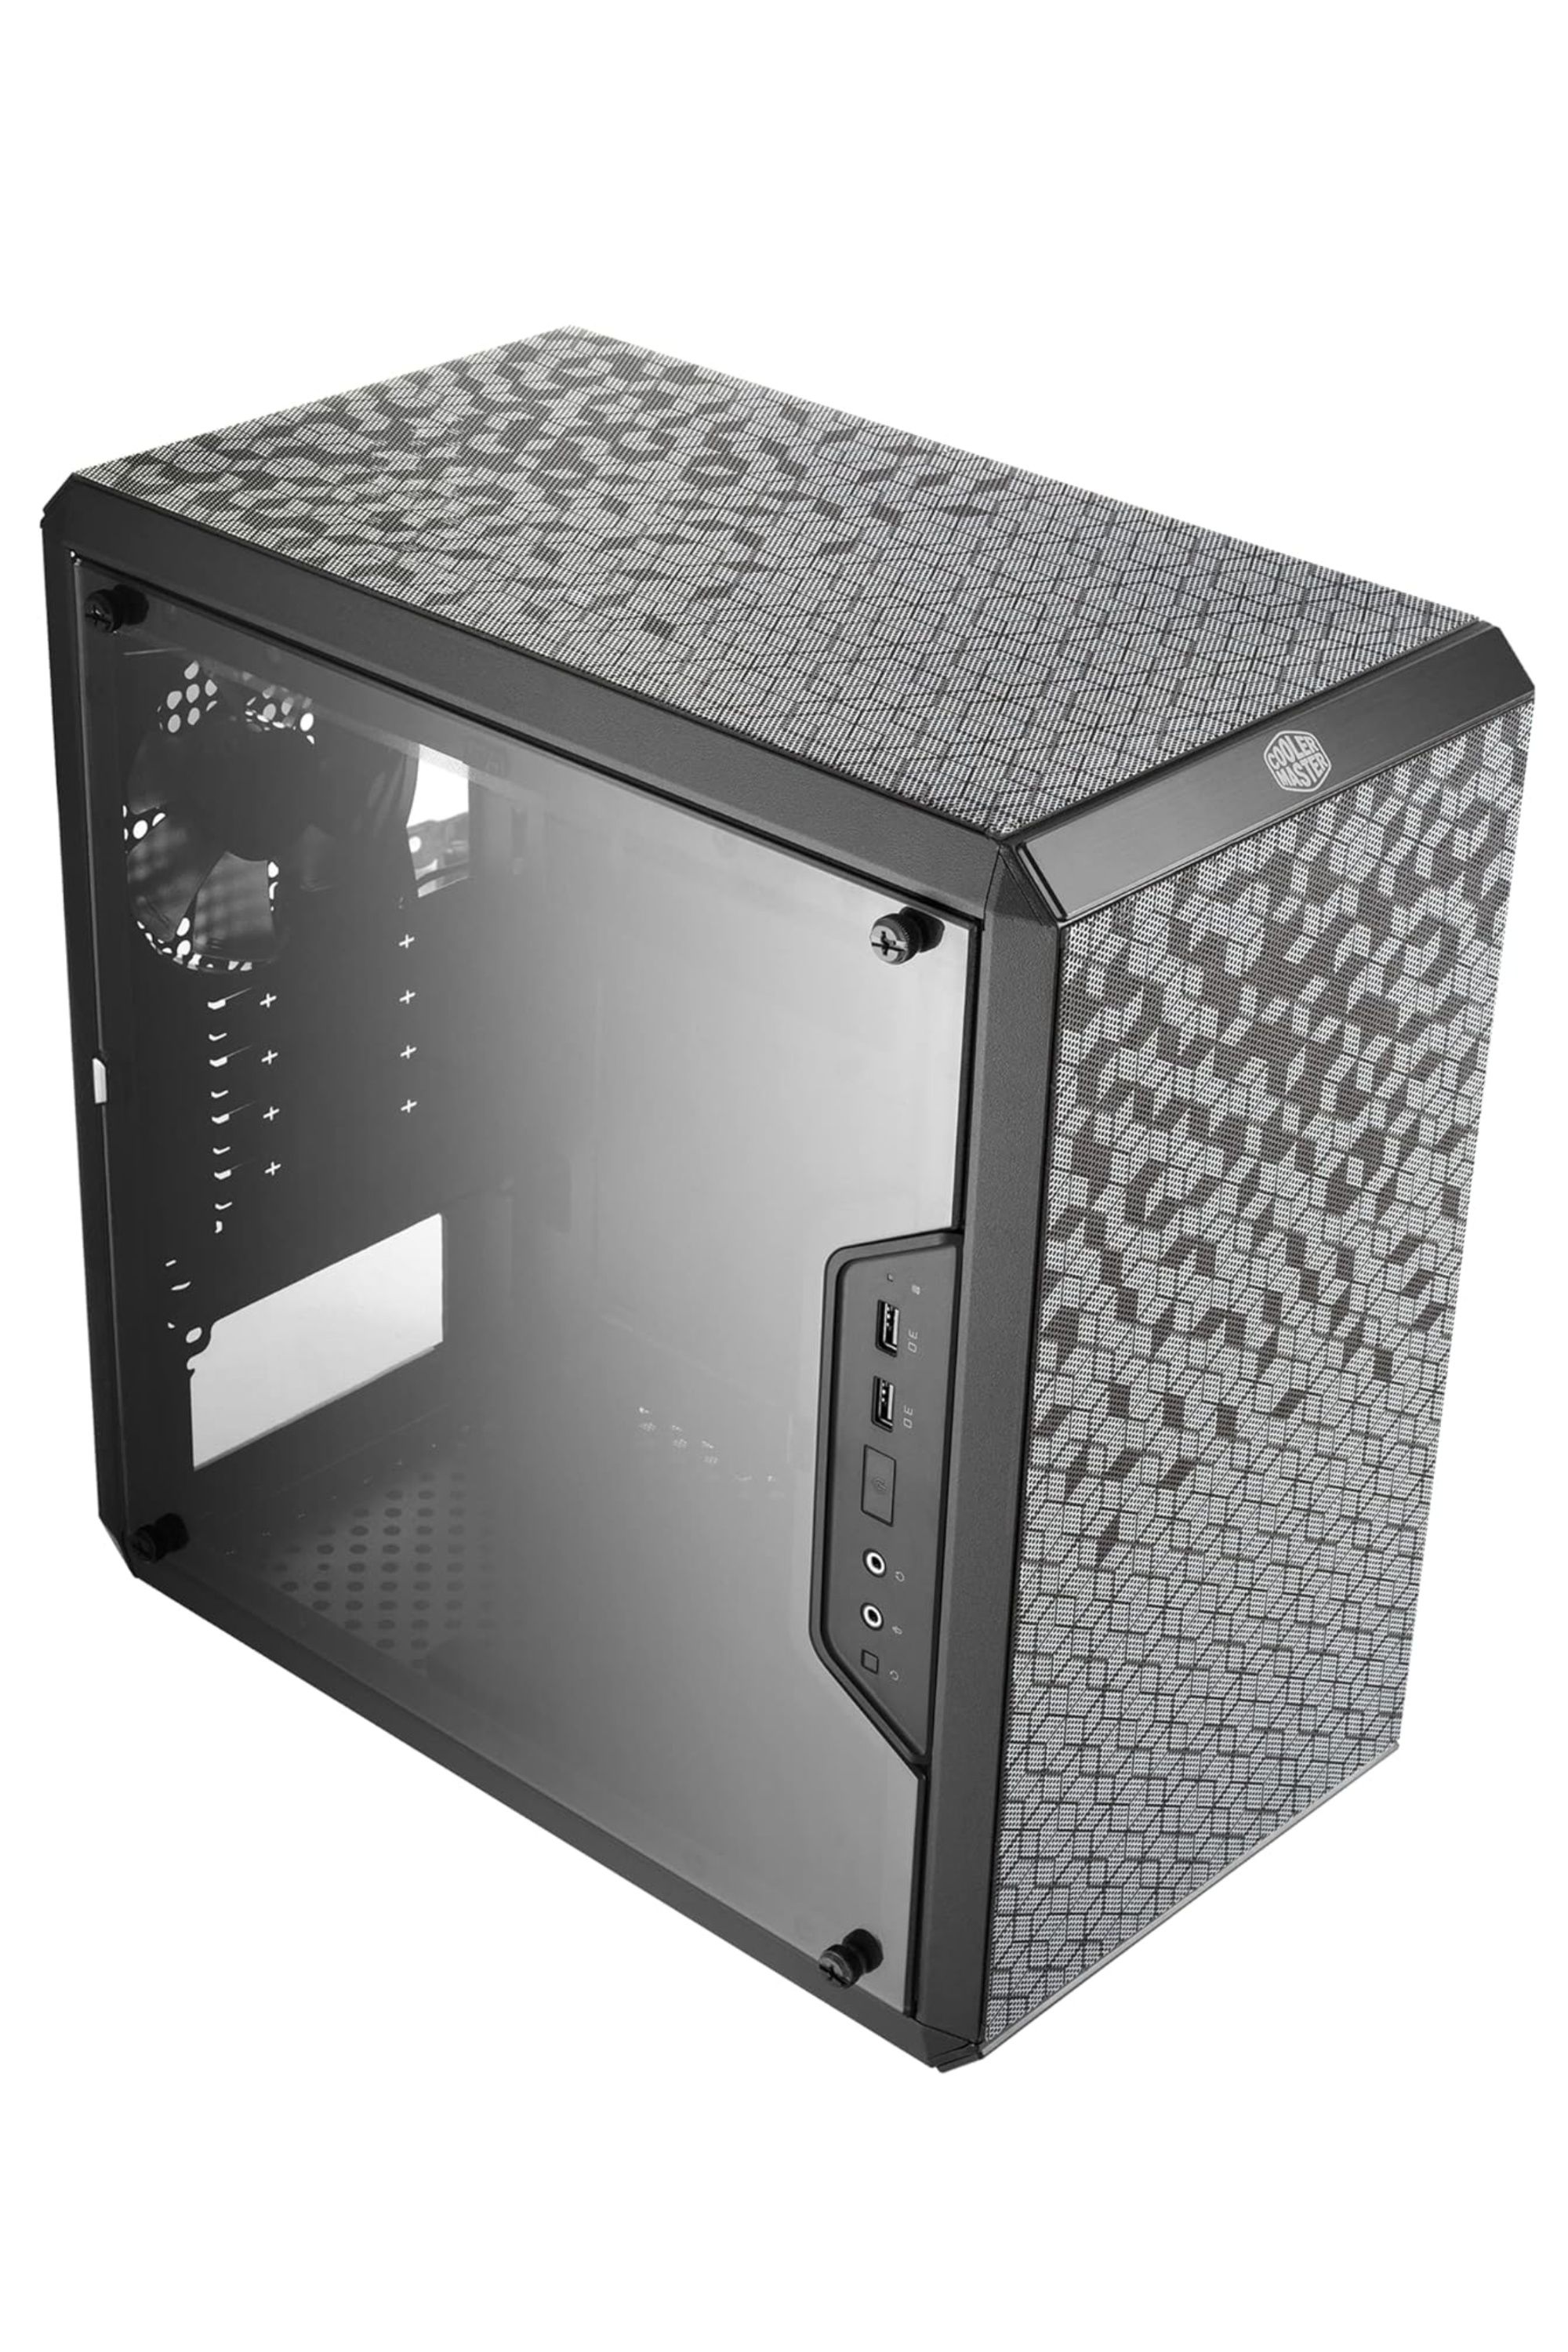 PC Cases With The Best Air Flow